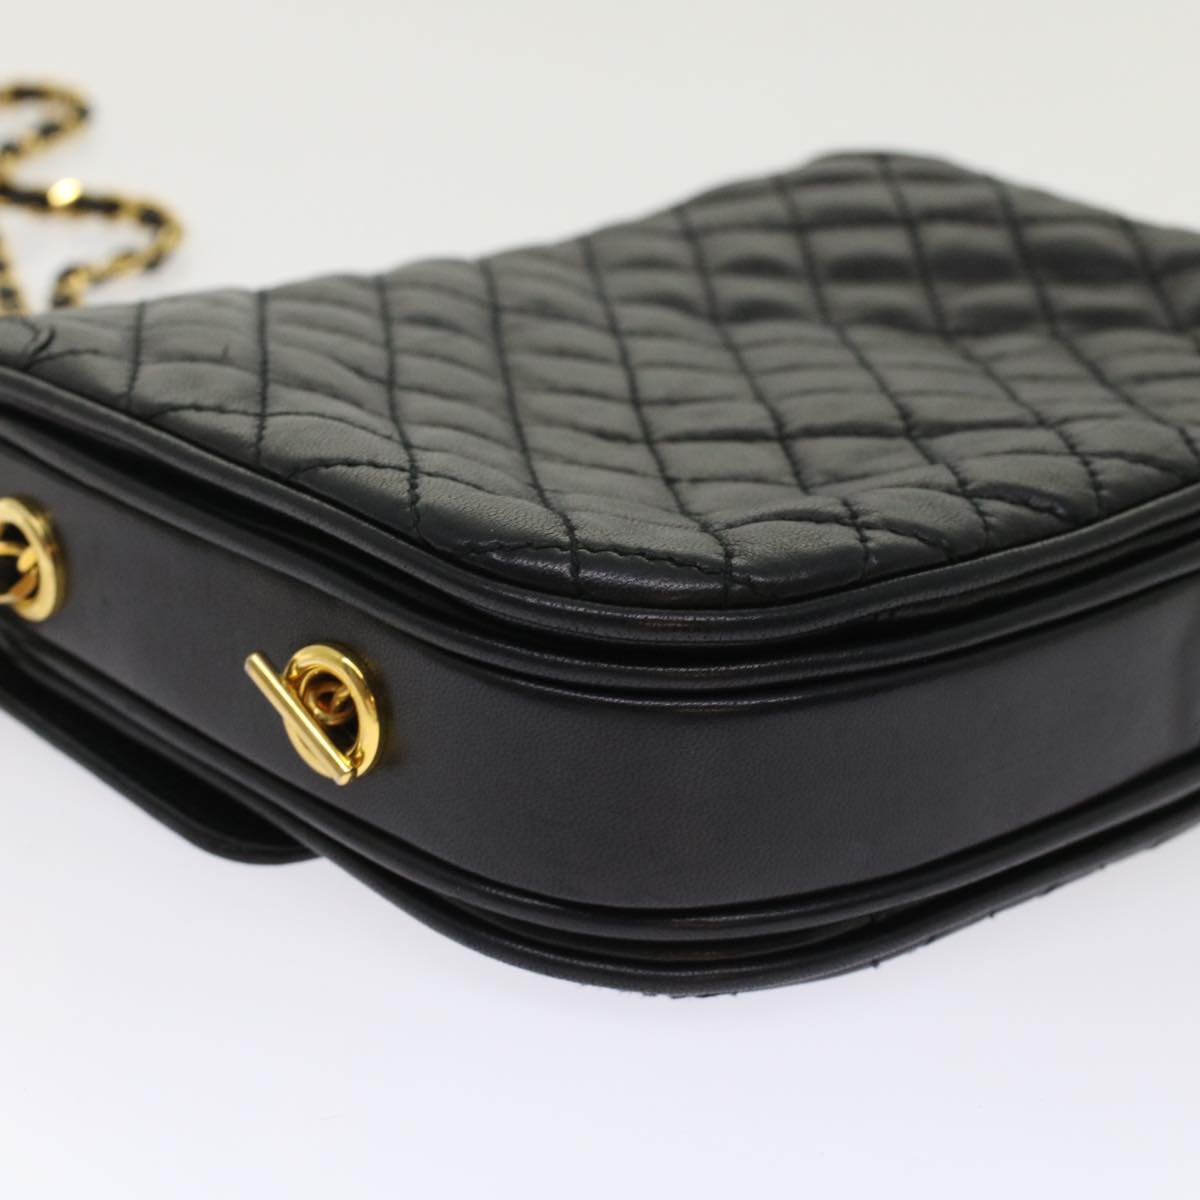 BALLY Quilted Chain Shoulder Bag Leather Black Auth yk7930B